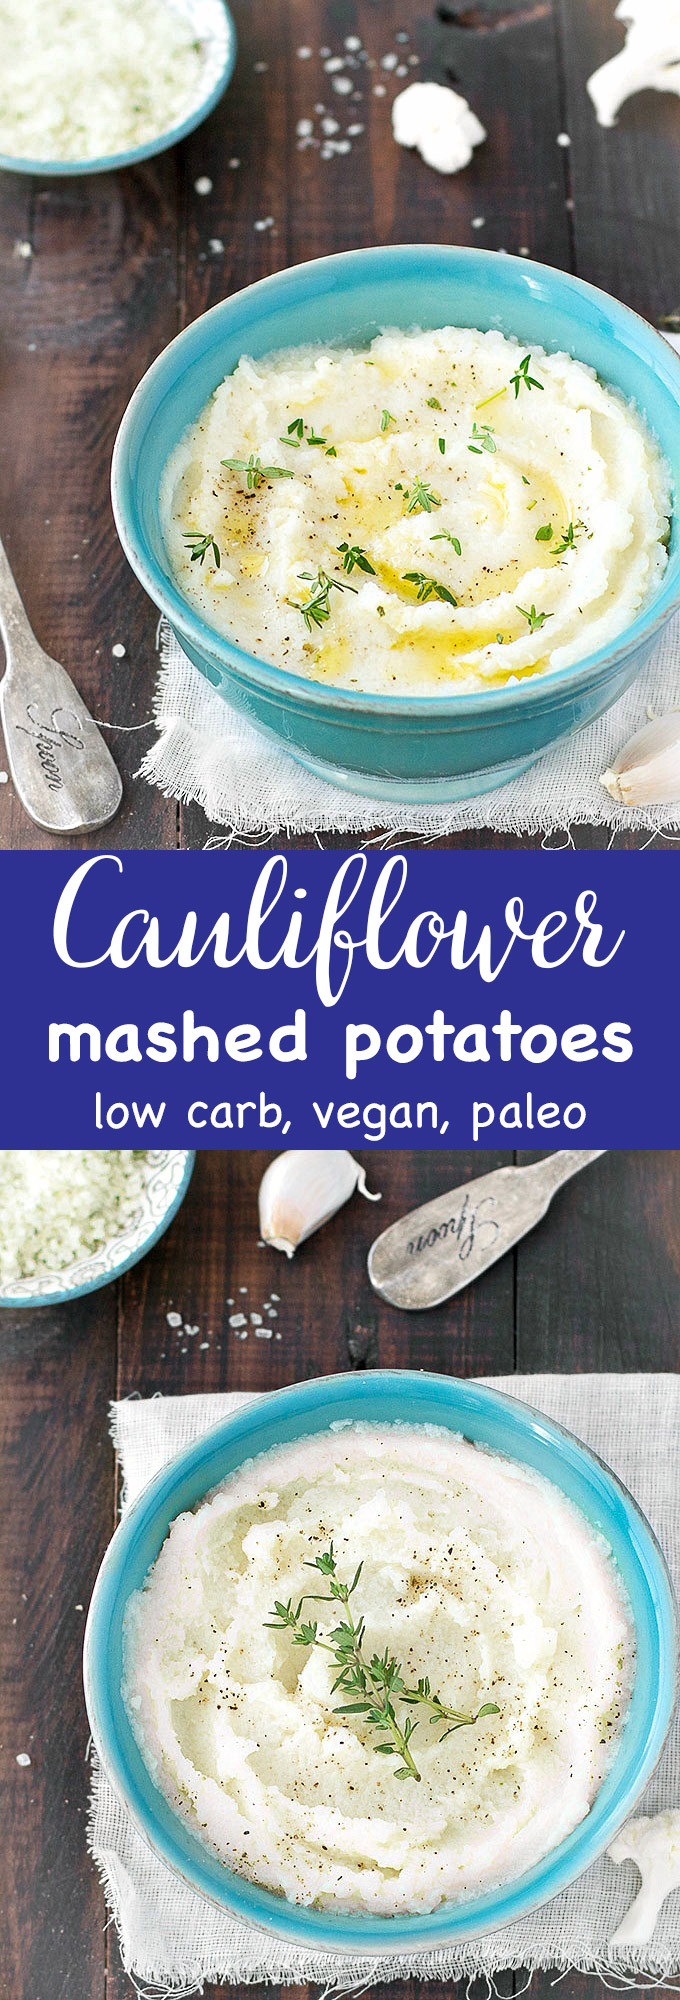 Mashed Potatoes Healthy
 Healthy Cauliflower Mashed Potatoes As Easy As Apple Pie